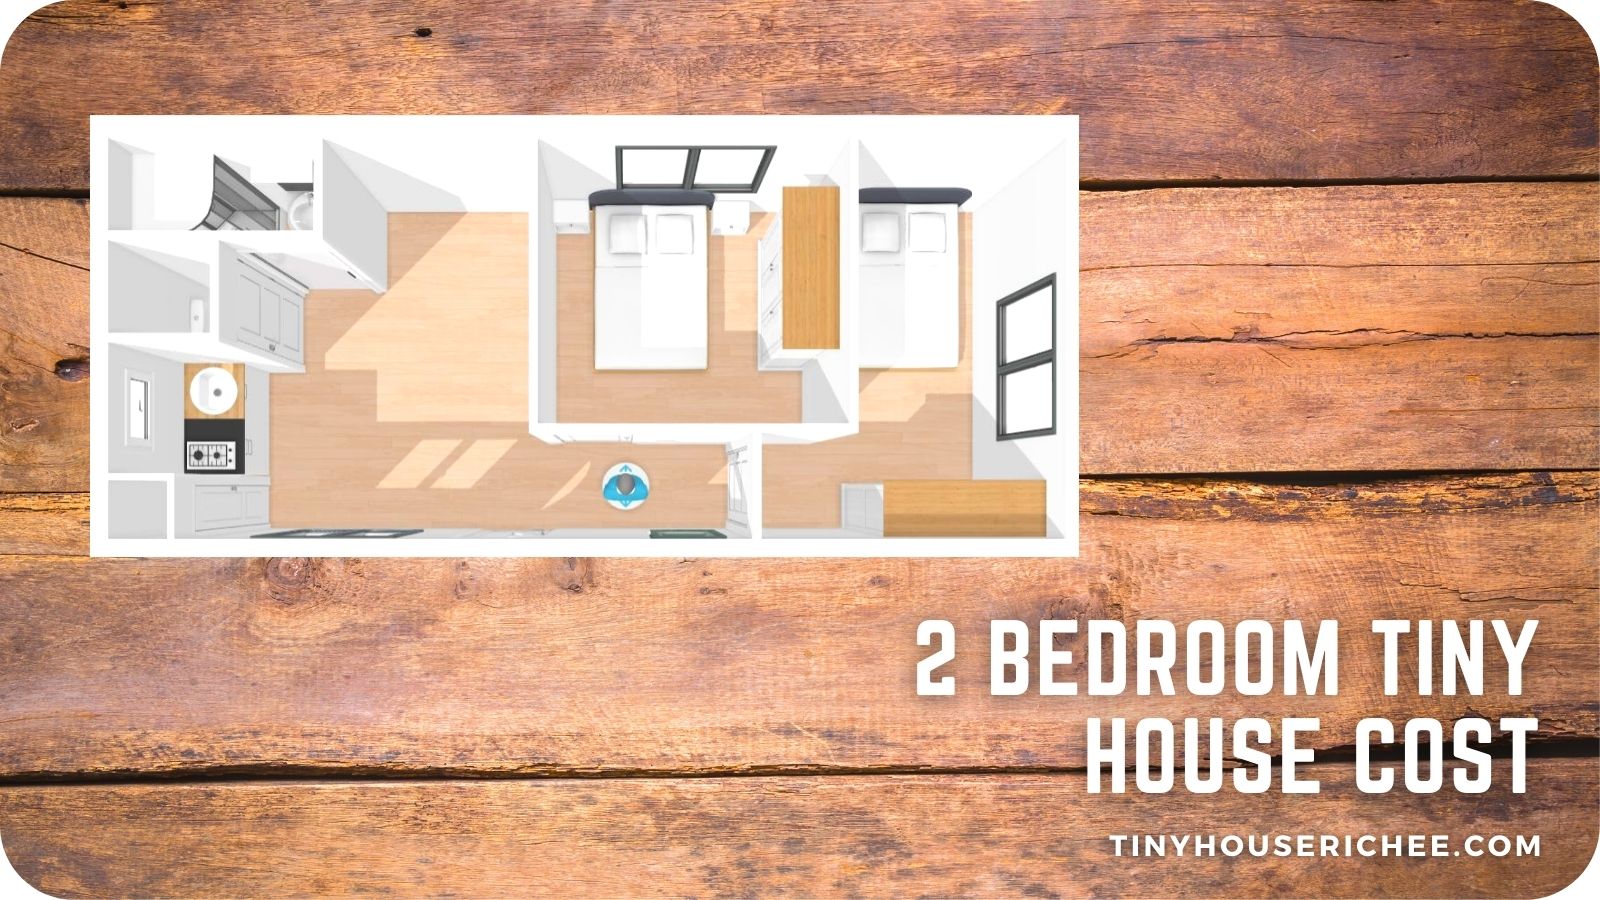 2 Bedroom Tiny House Cost: A Detailed Breakdown